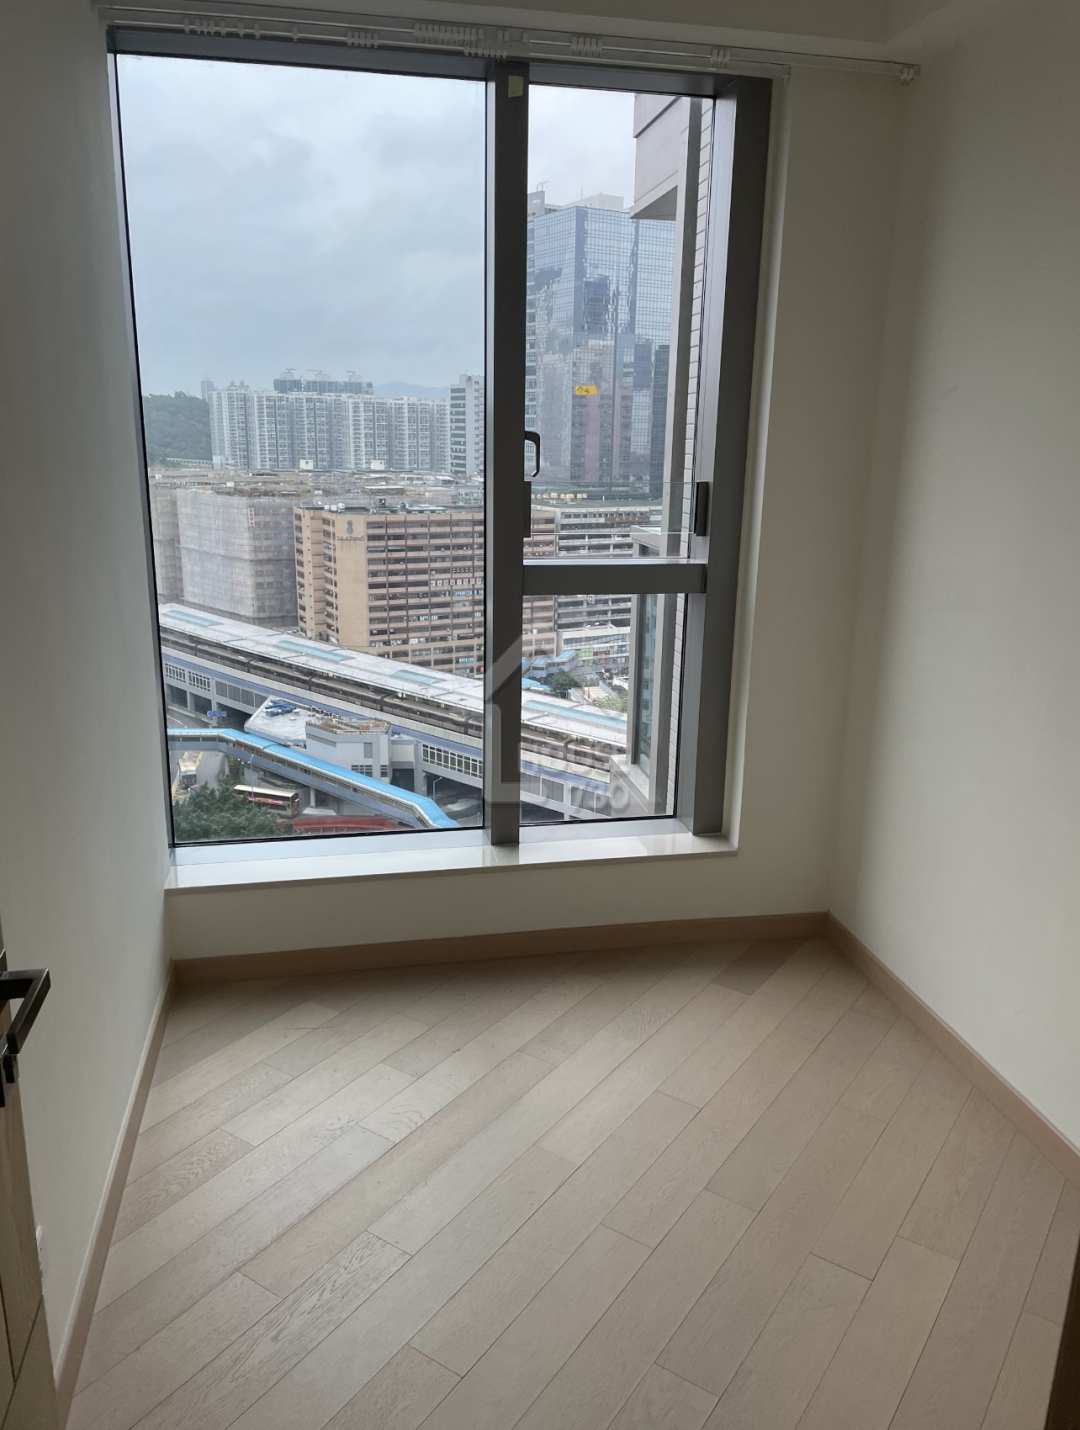 Kwun Tong GRAND CENTRAL Middle Floor Bedroom 1 House730-5138807